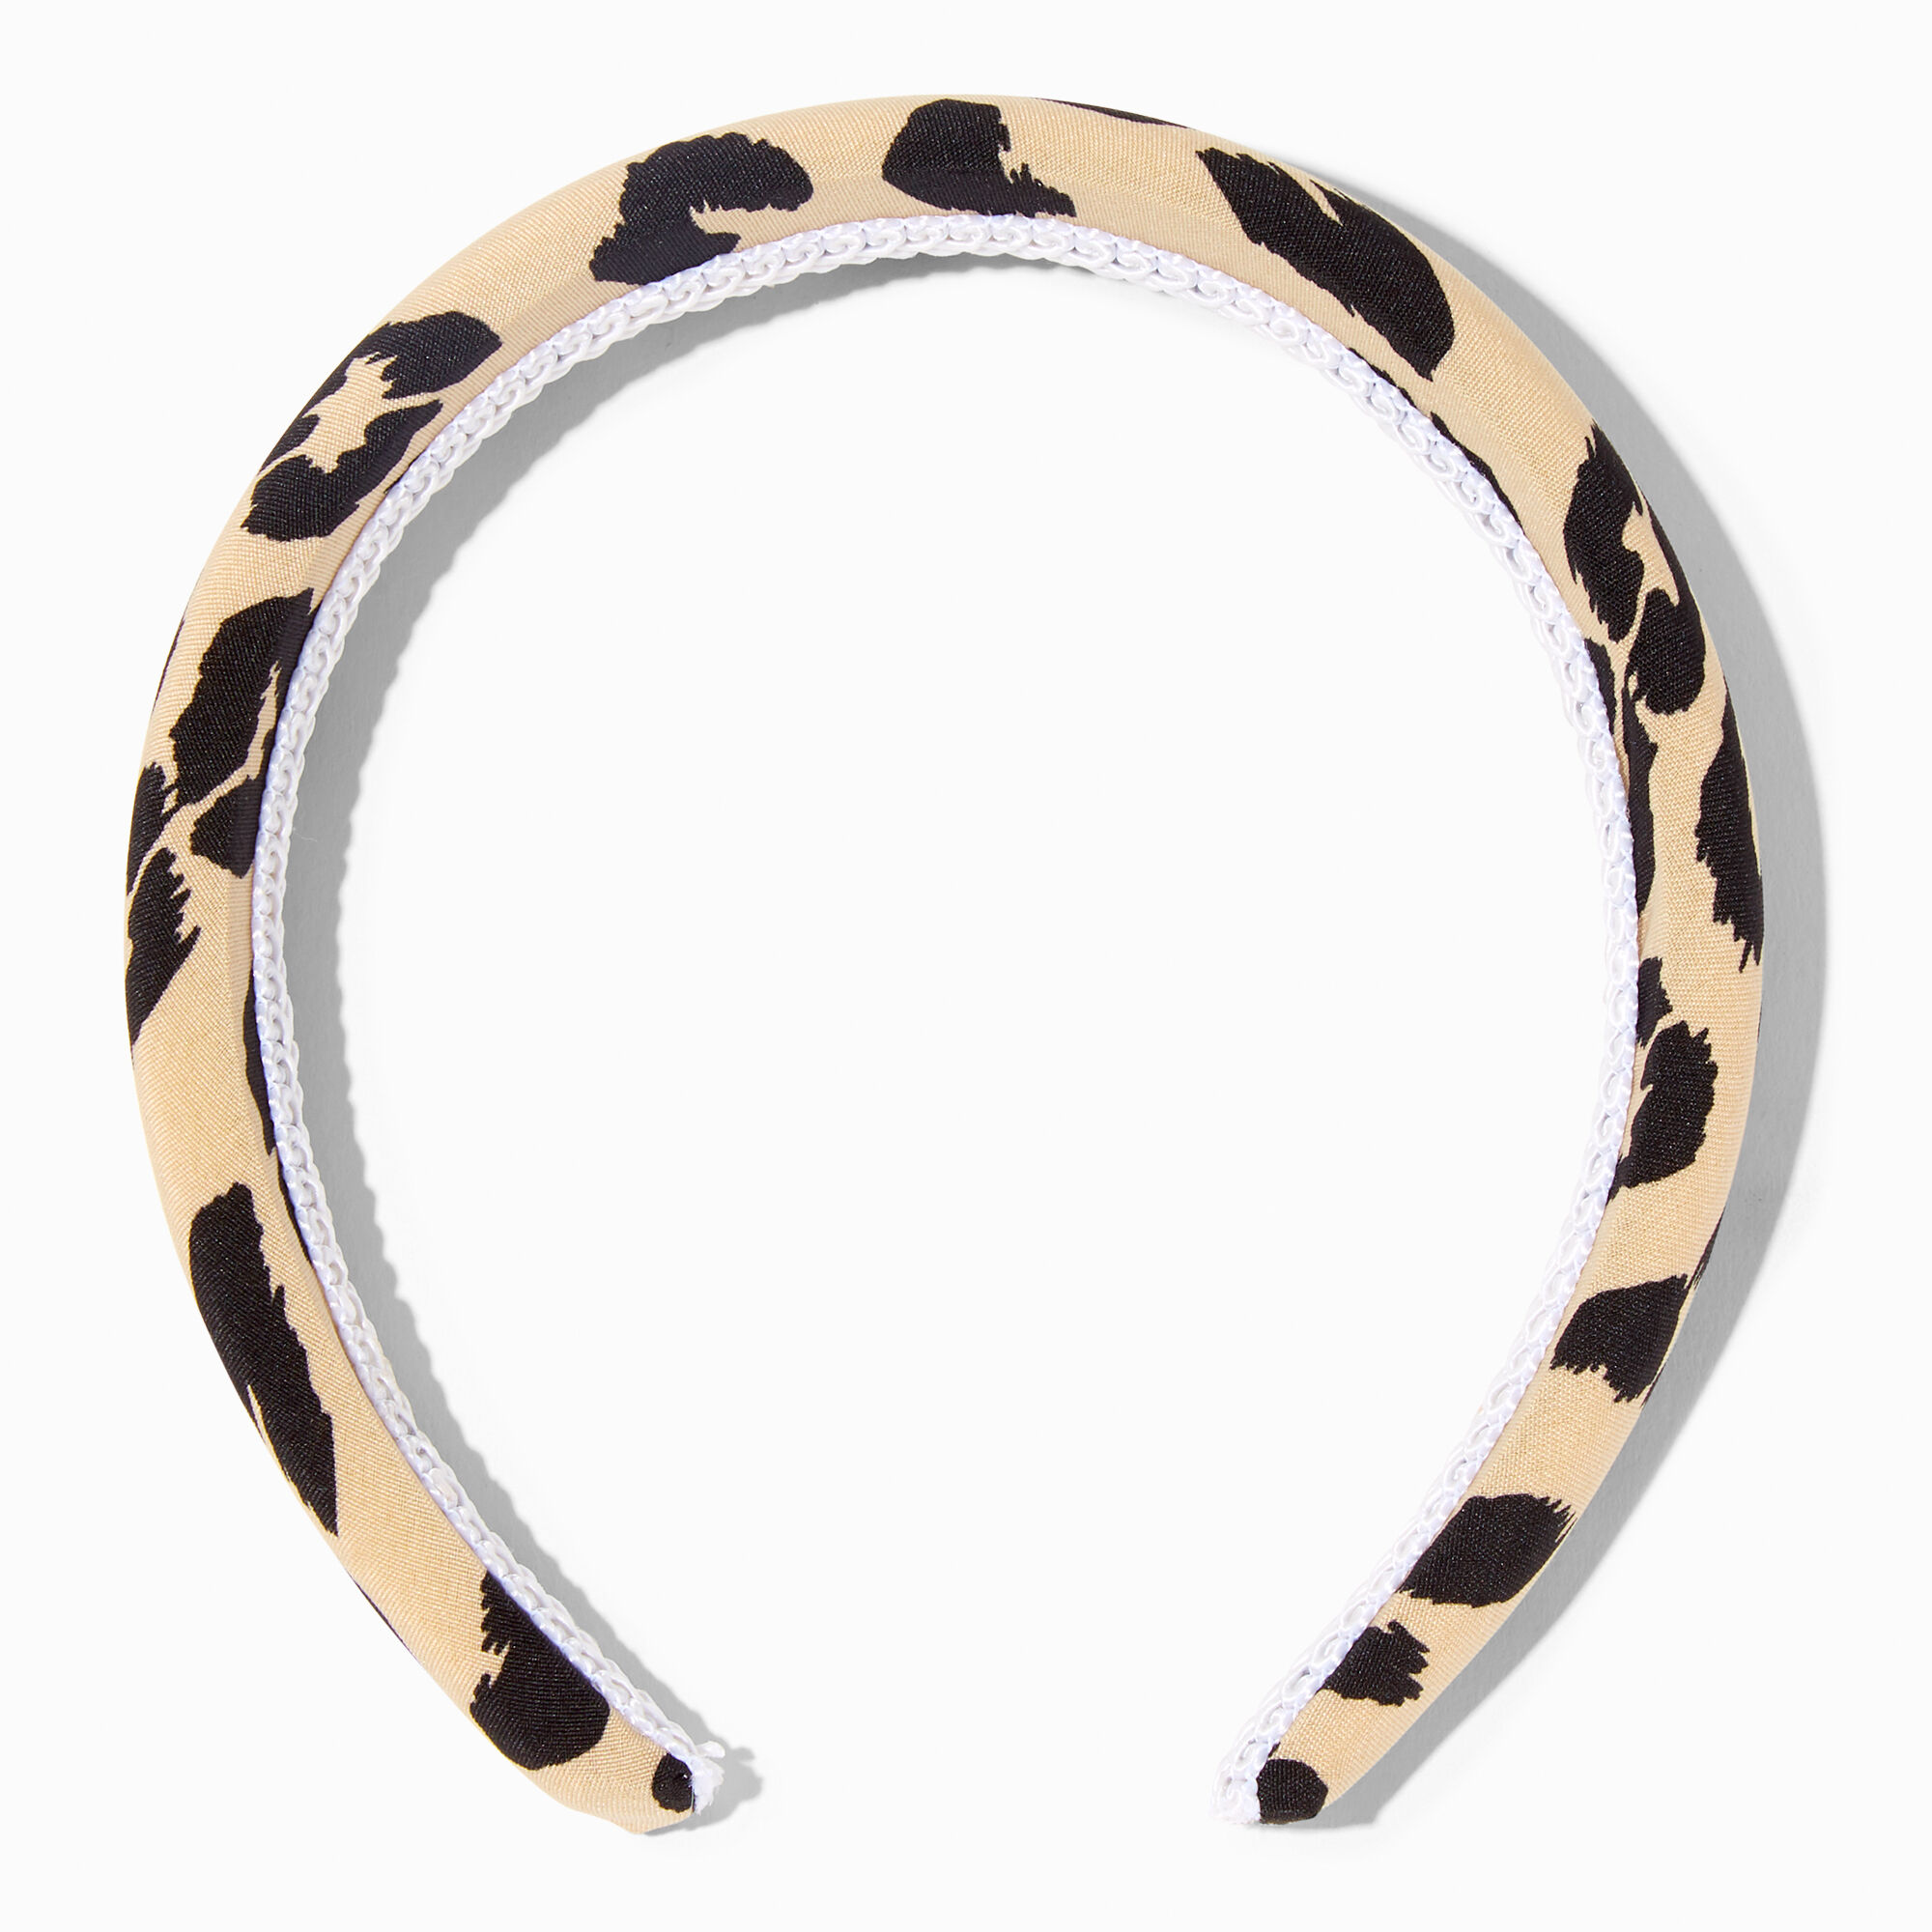 View Claires Animal Print Puffy Headband Tan information